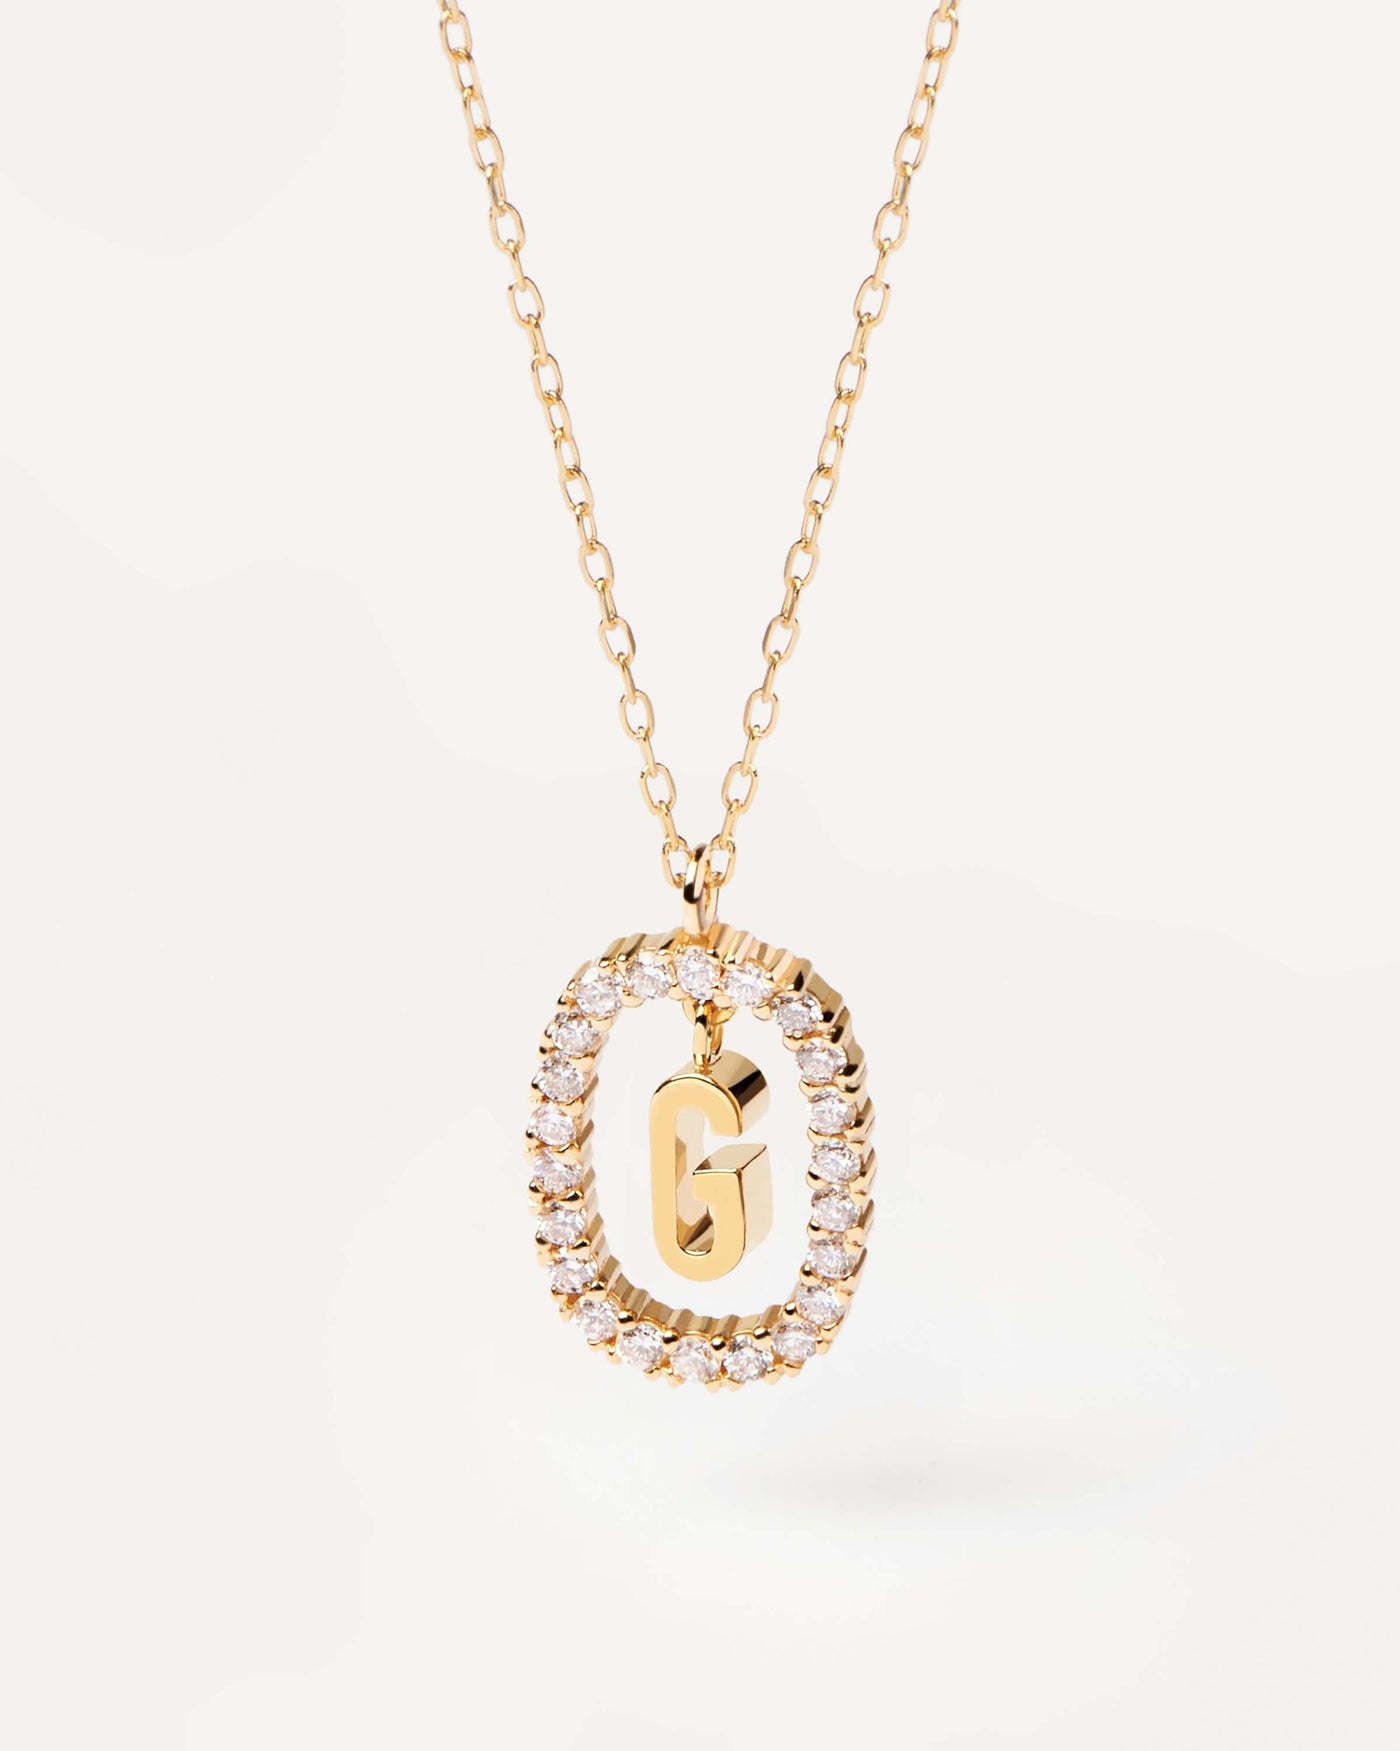 2023 Selection | Diamonds and Gold Letter G Necklace. Initial G necklace in solid yellow gold, circled by 0.33 carats lab-grown diamonds. Get the latest arrival from PDPAOLA. Place your order safely and get this Best Seller. Free Shipping.